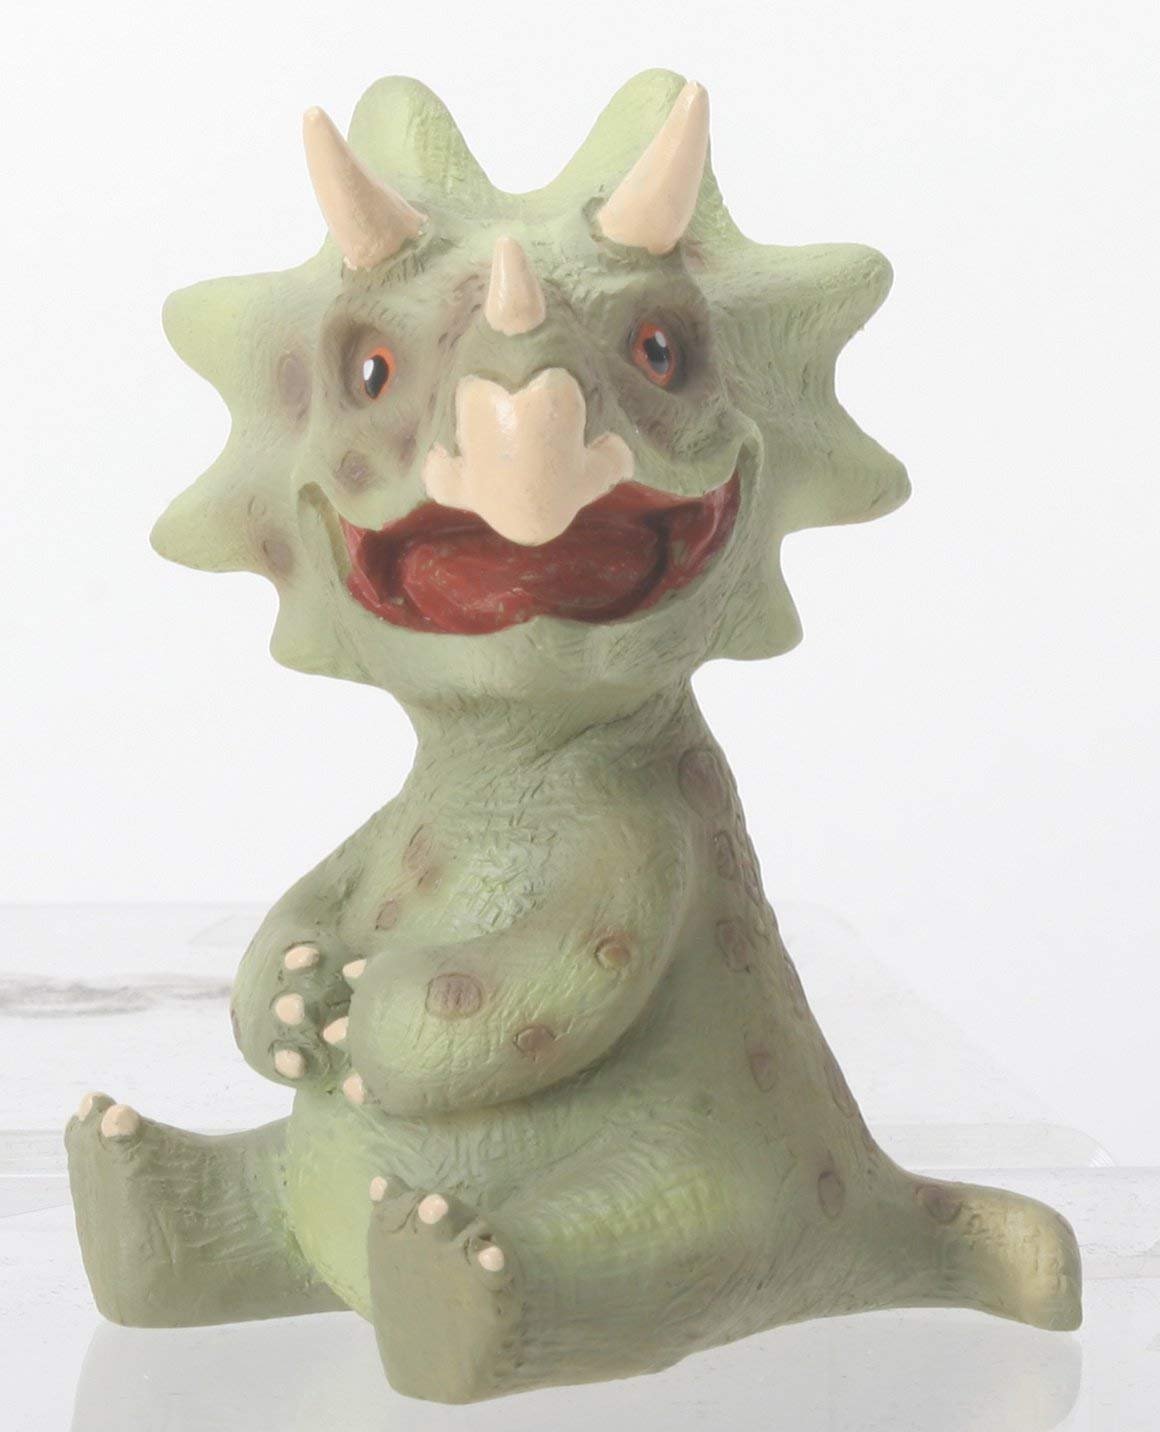 Light Color Painted Baby Triceratops Dinosaur Figurine Statue